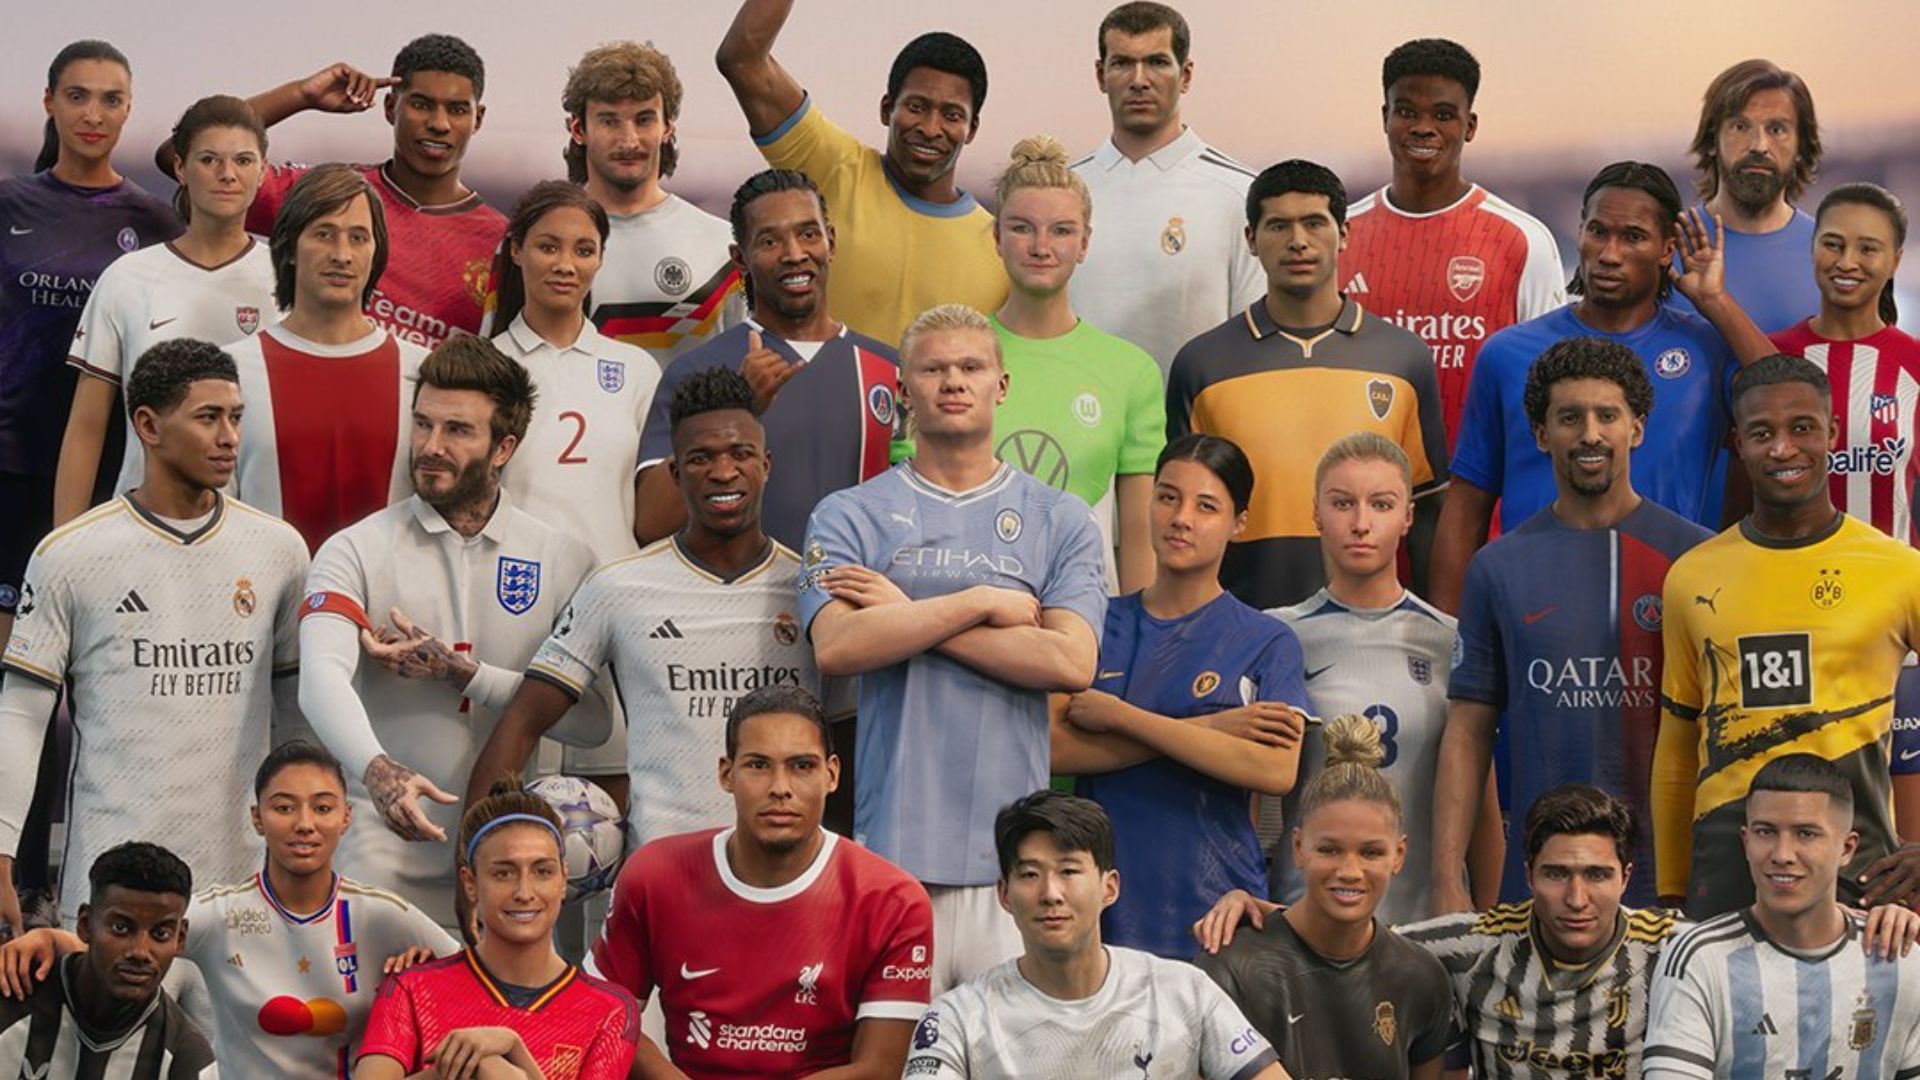 FIFA 23 guide: How to link your Epic Games Store account with EA